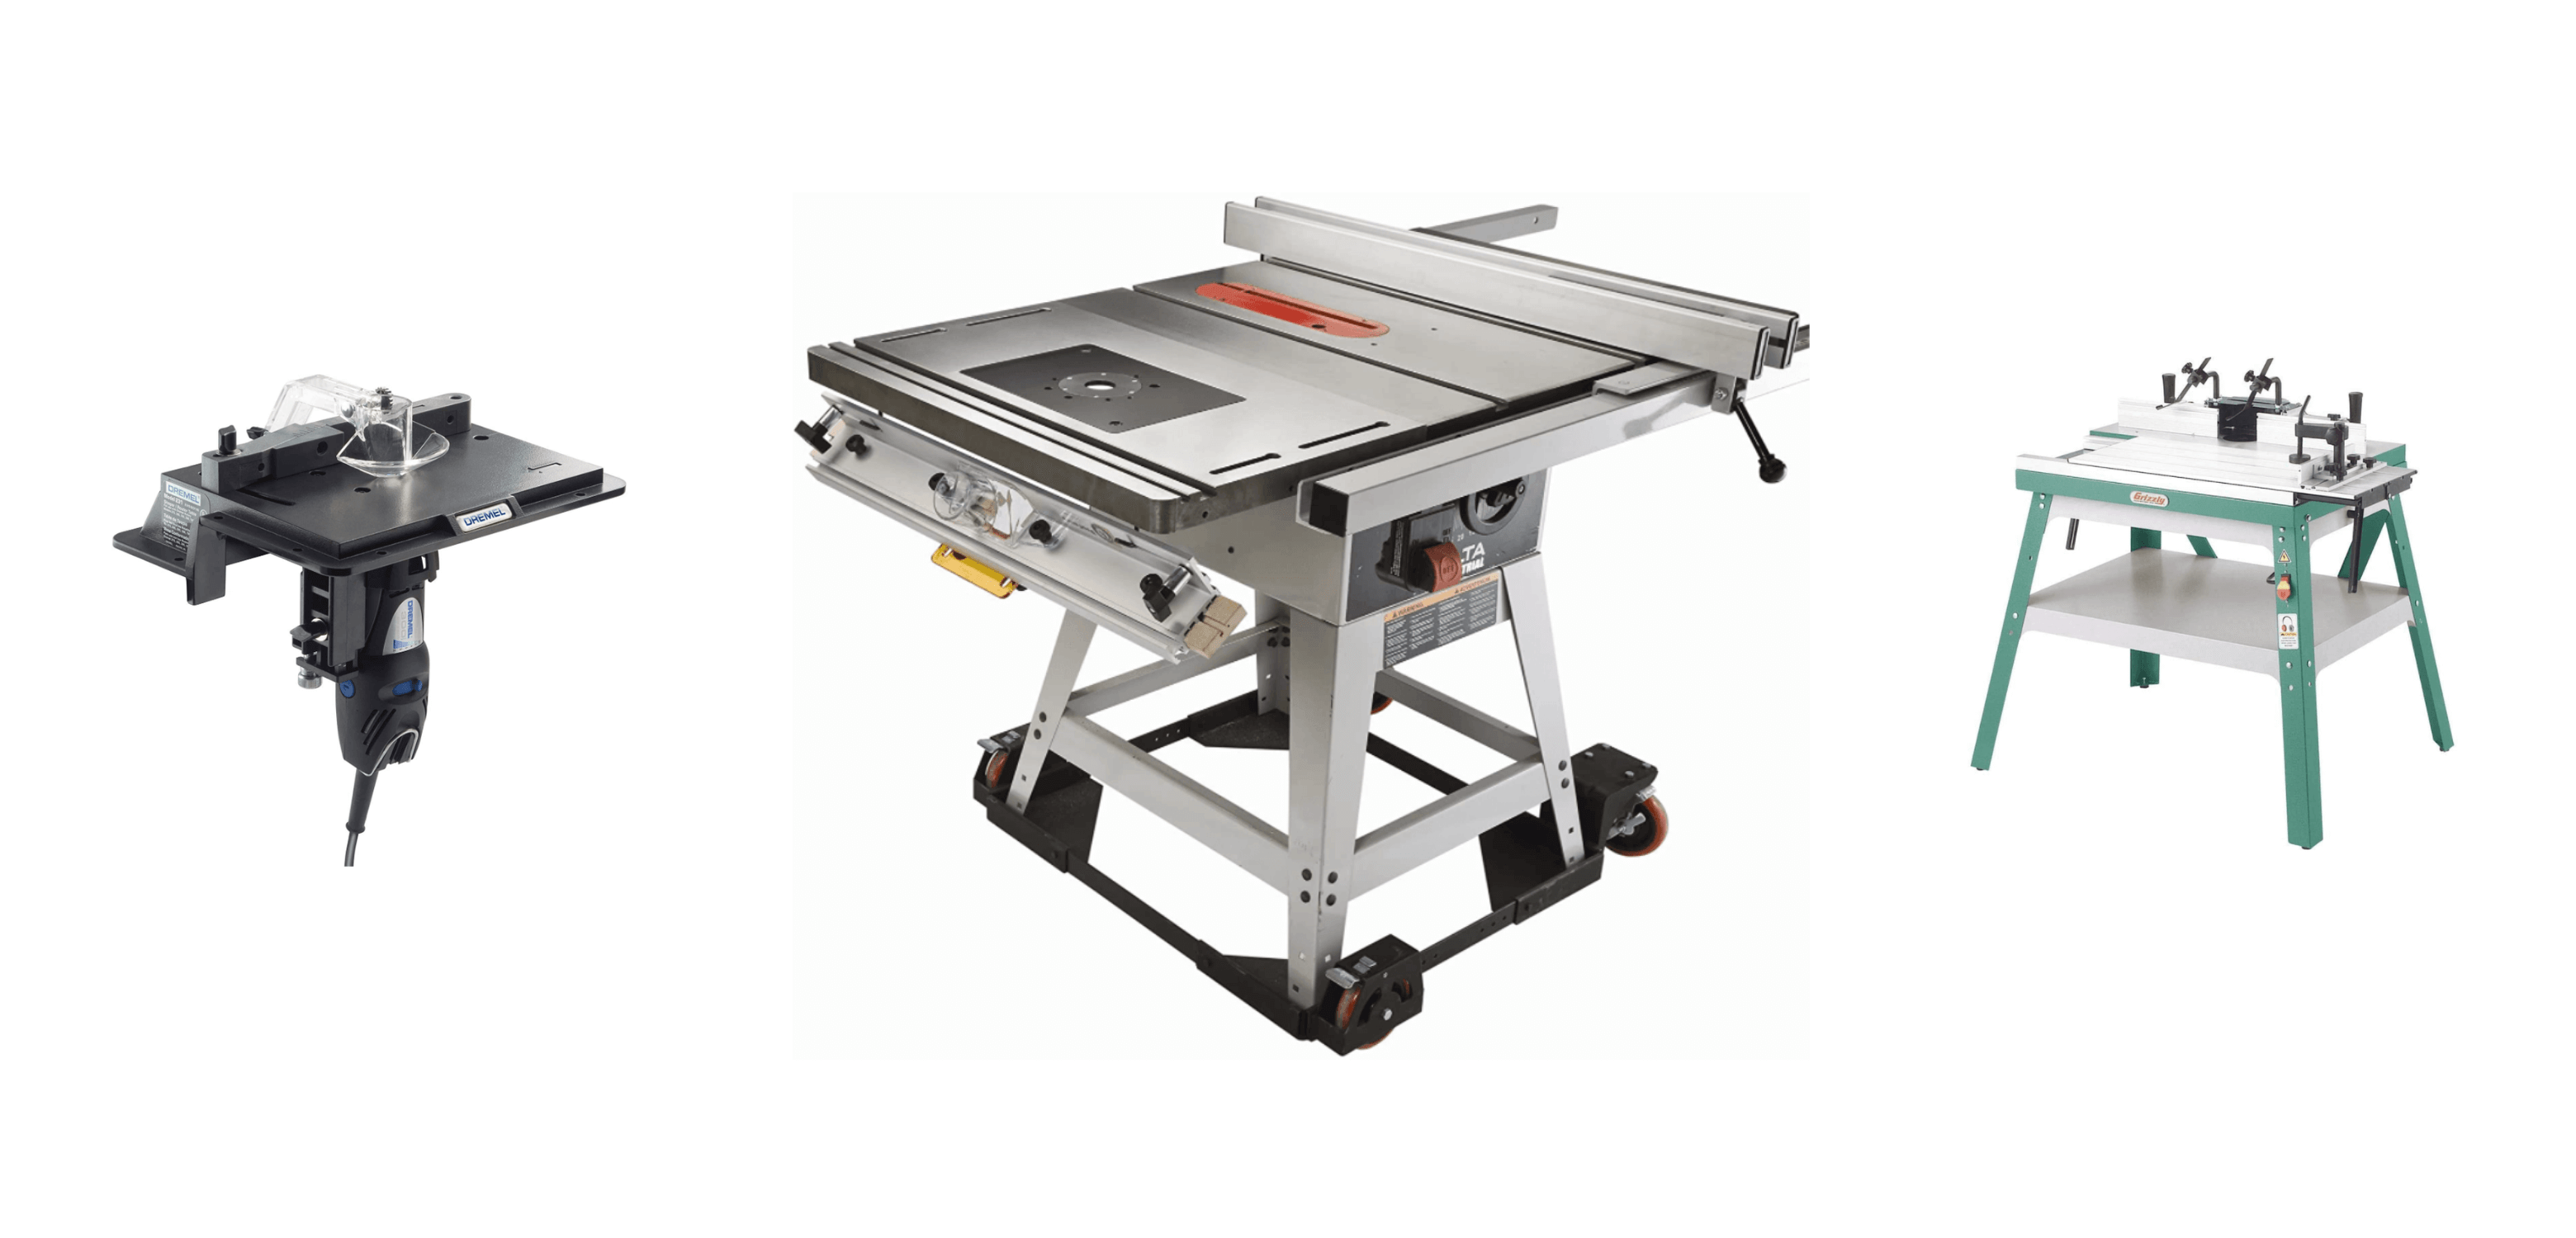 Best Budget Router Tables